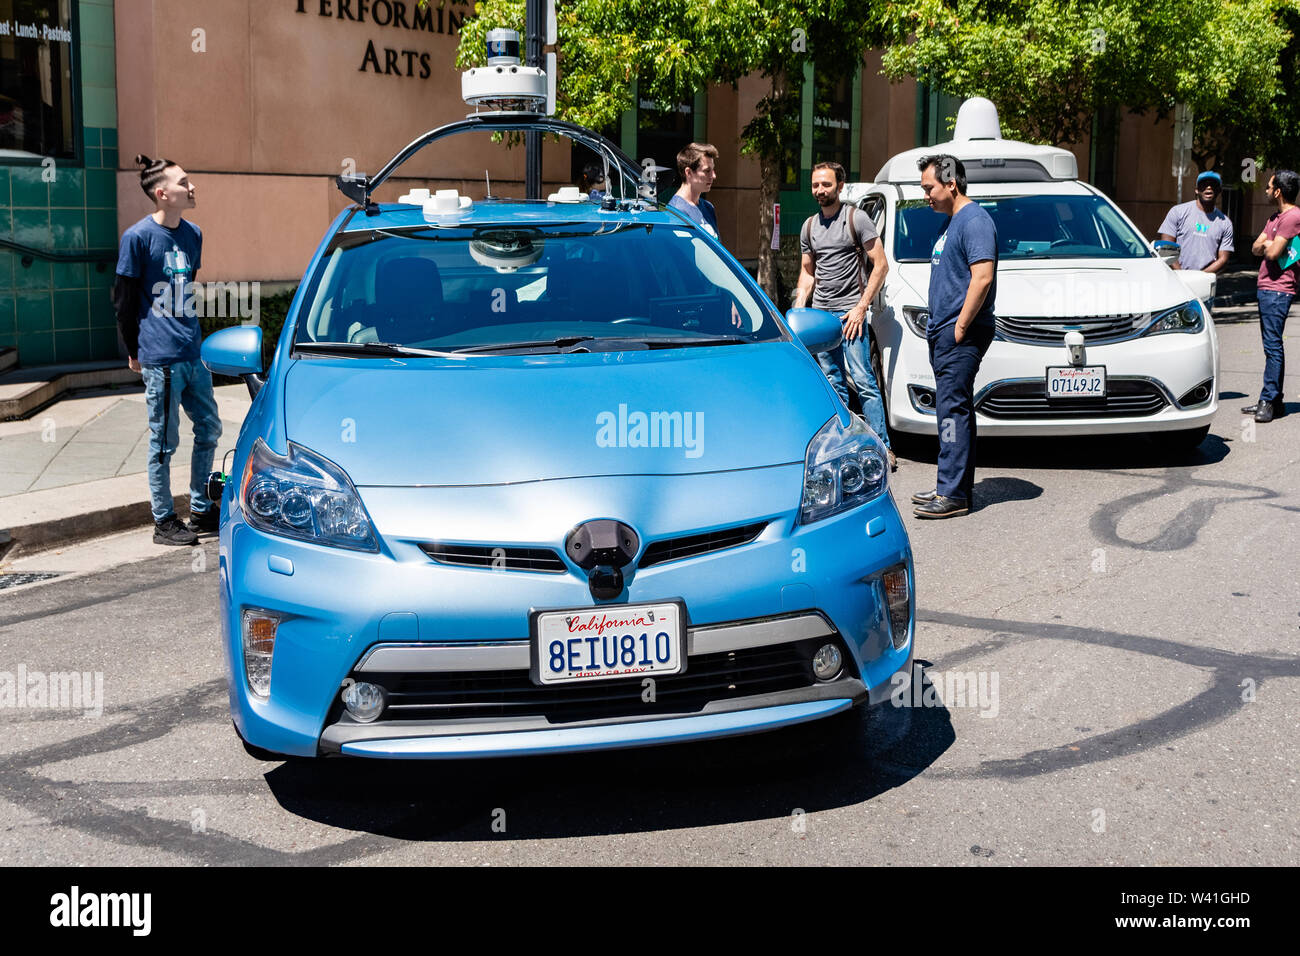 July 16, 2019 Mountain View / CA / USA - Nuro self driving vehicle on display at Technology Showcase; Google Waymo self driving car visible in the bac Stock Photo